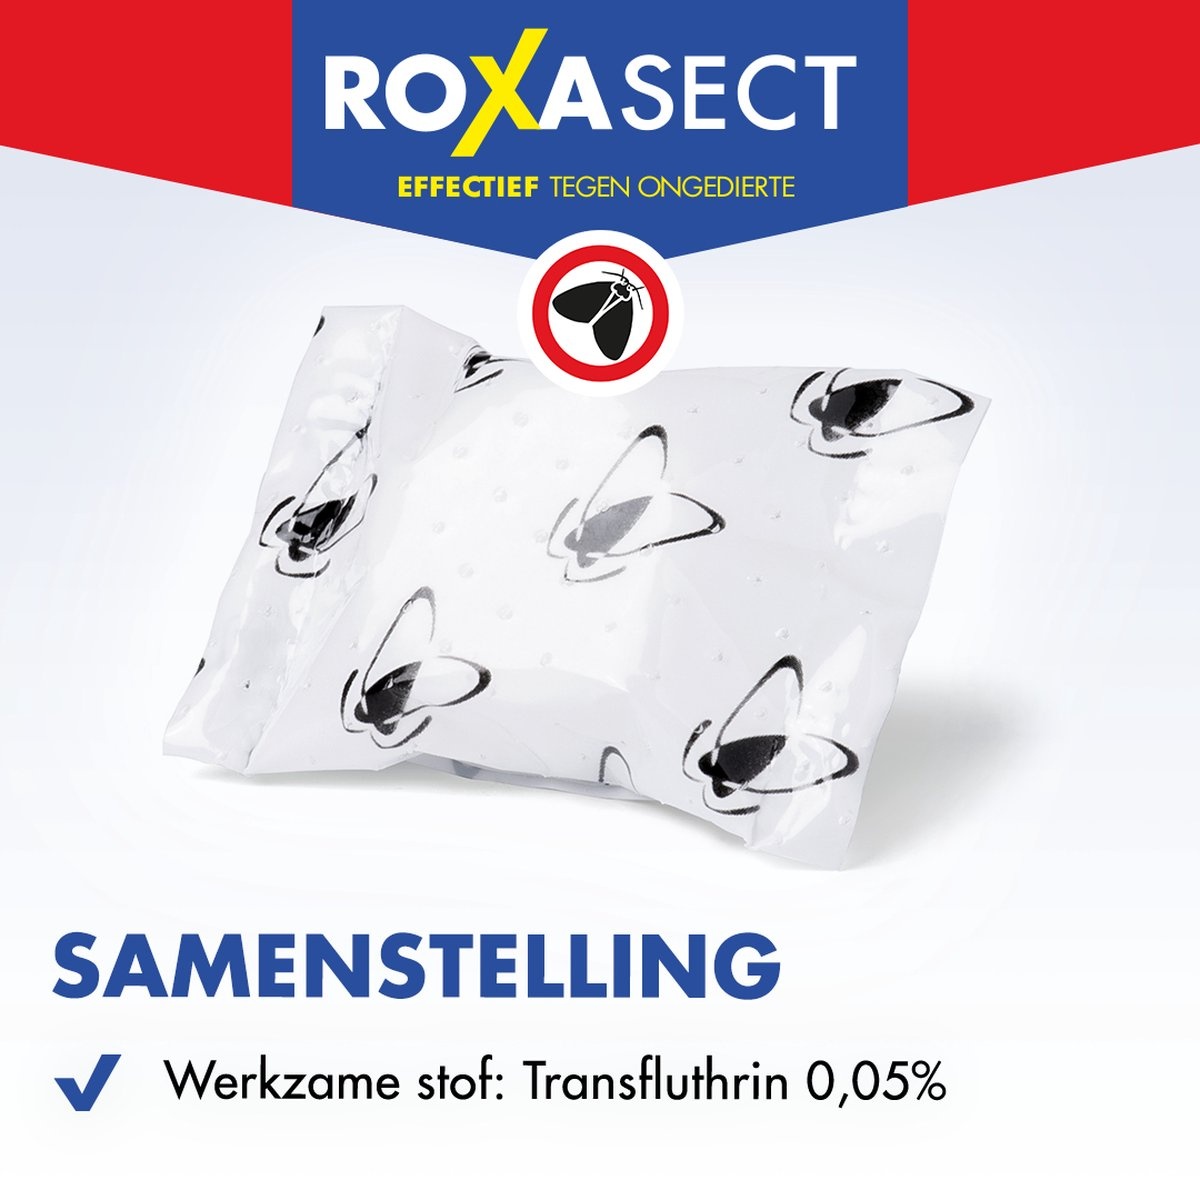 Roxasect Anti Mothballs - 20 pieces